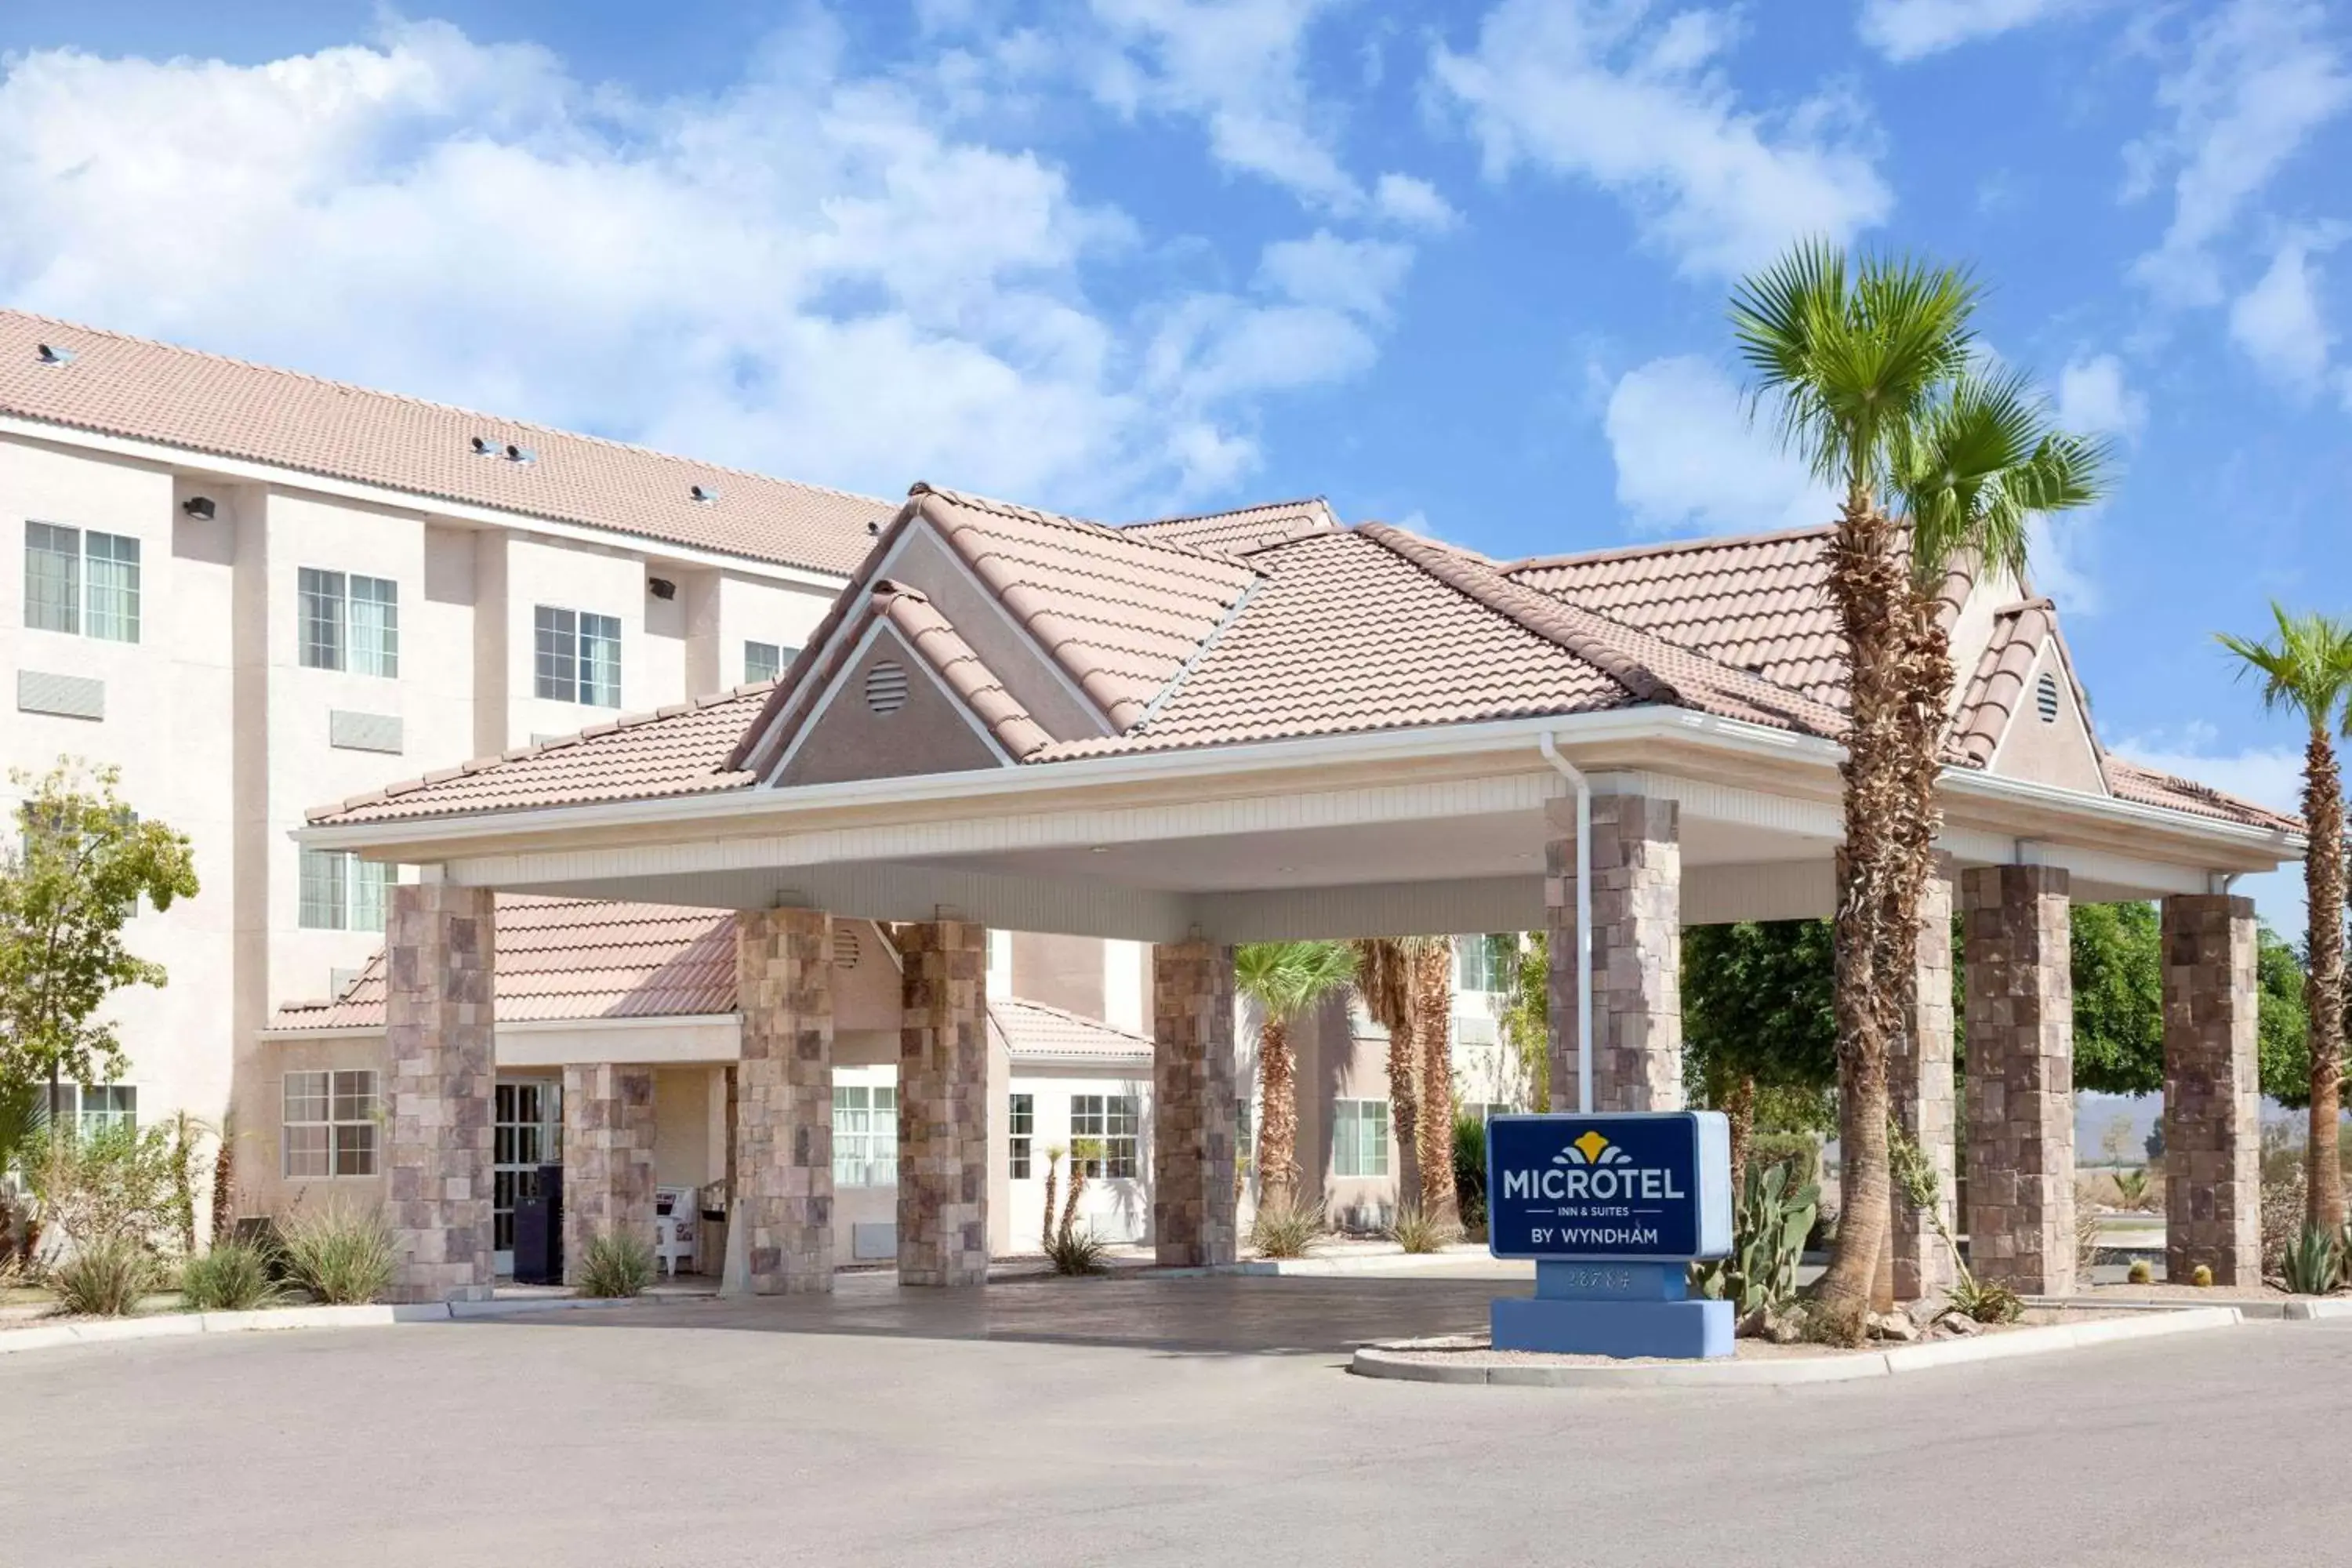 Property Building in Microtel Inn & Suites by Wyndham Wellton